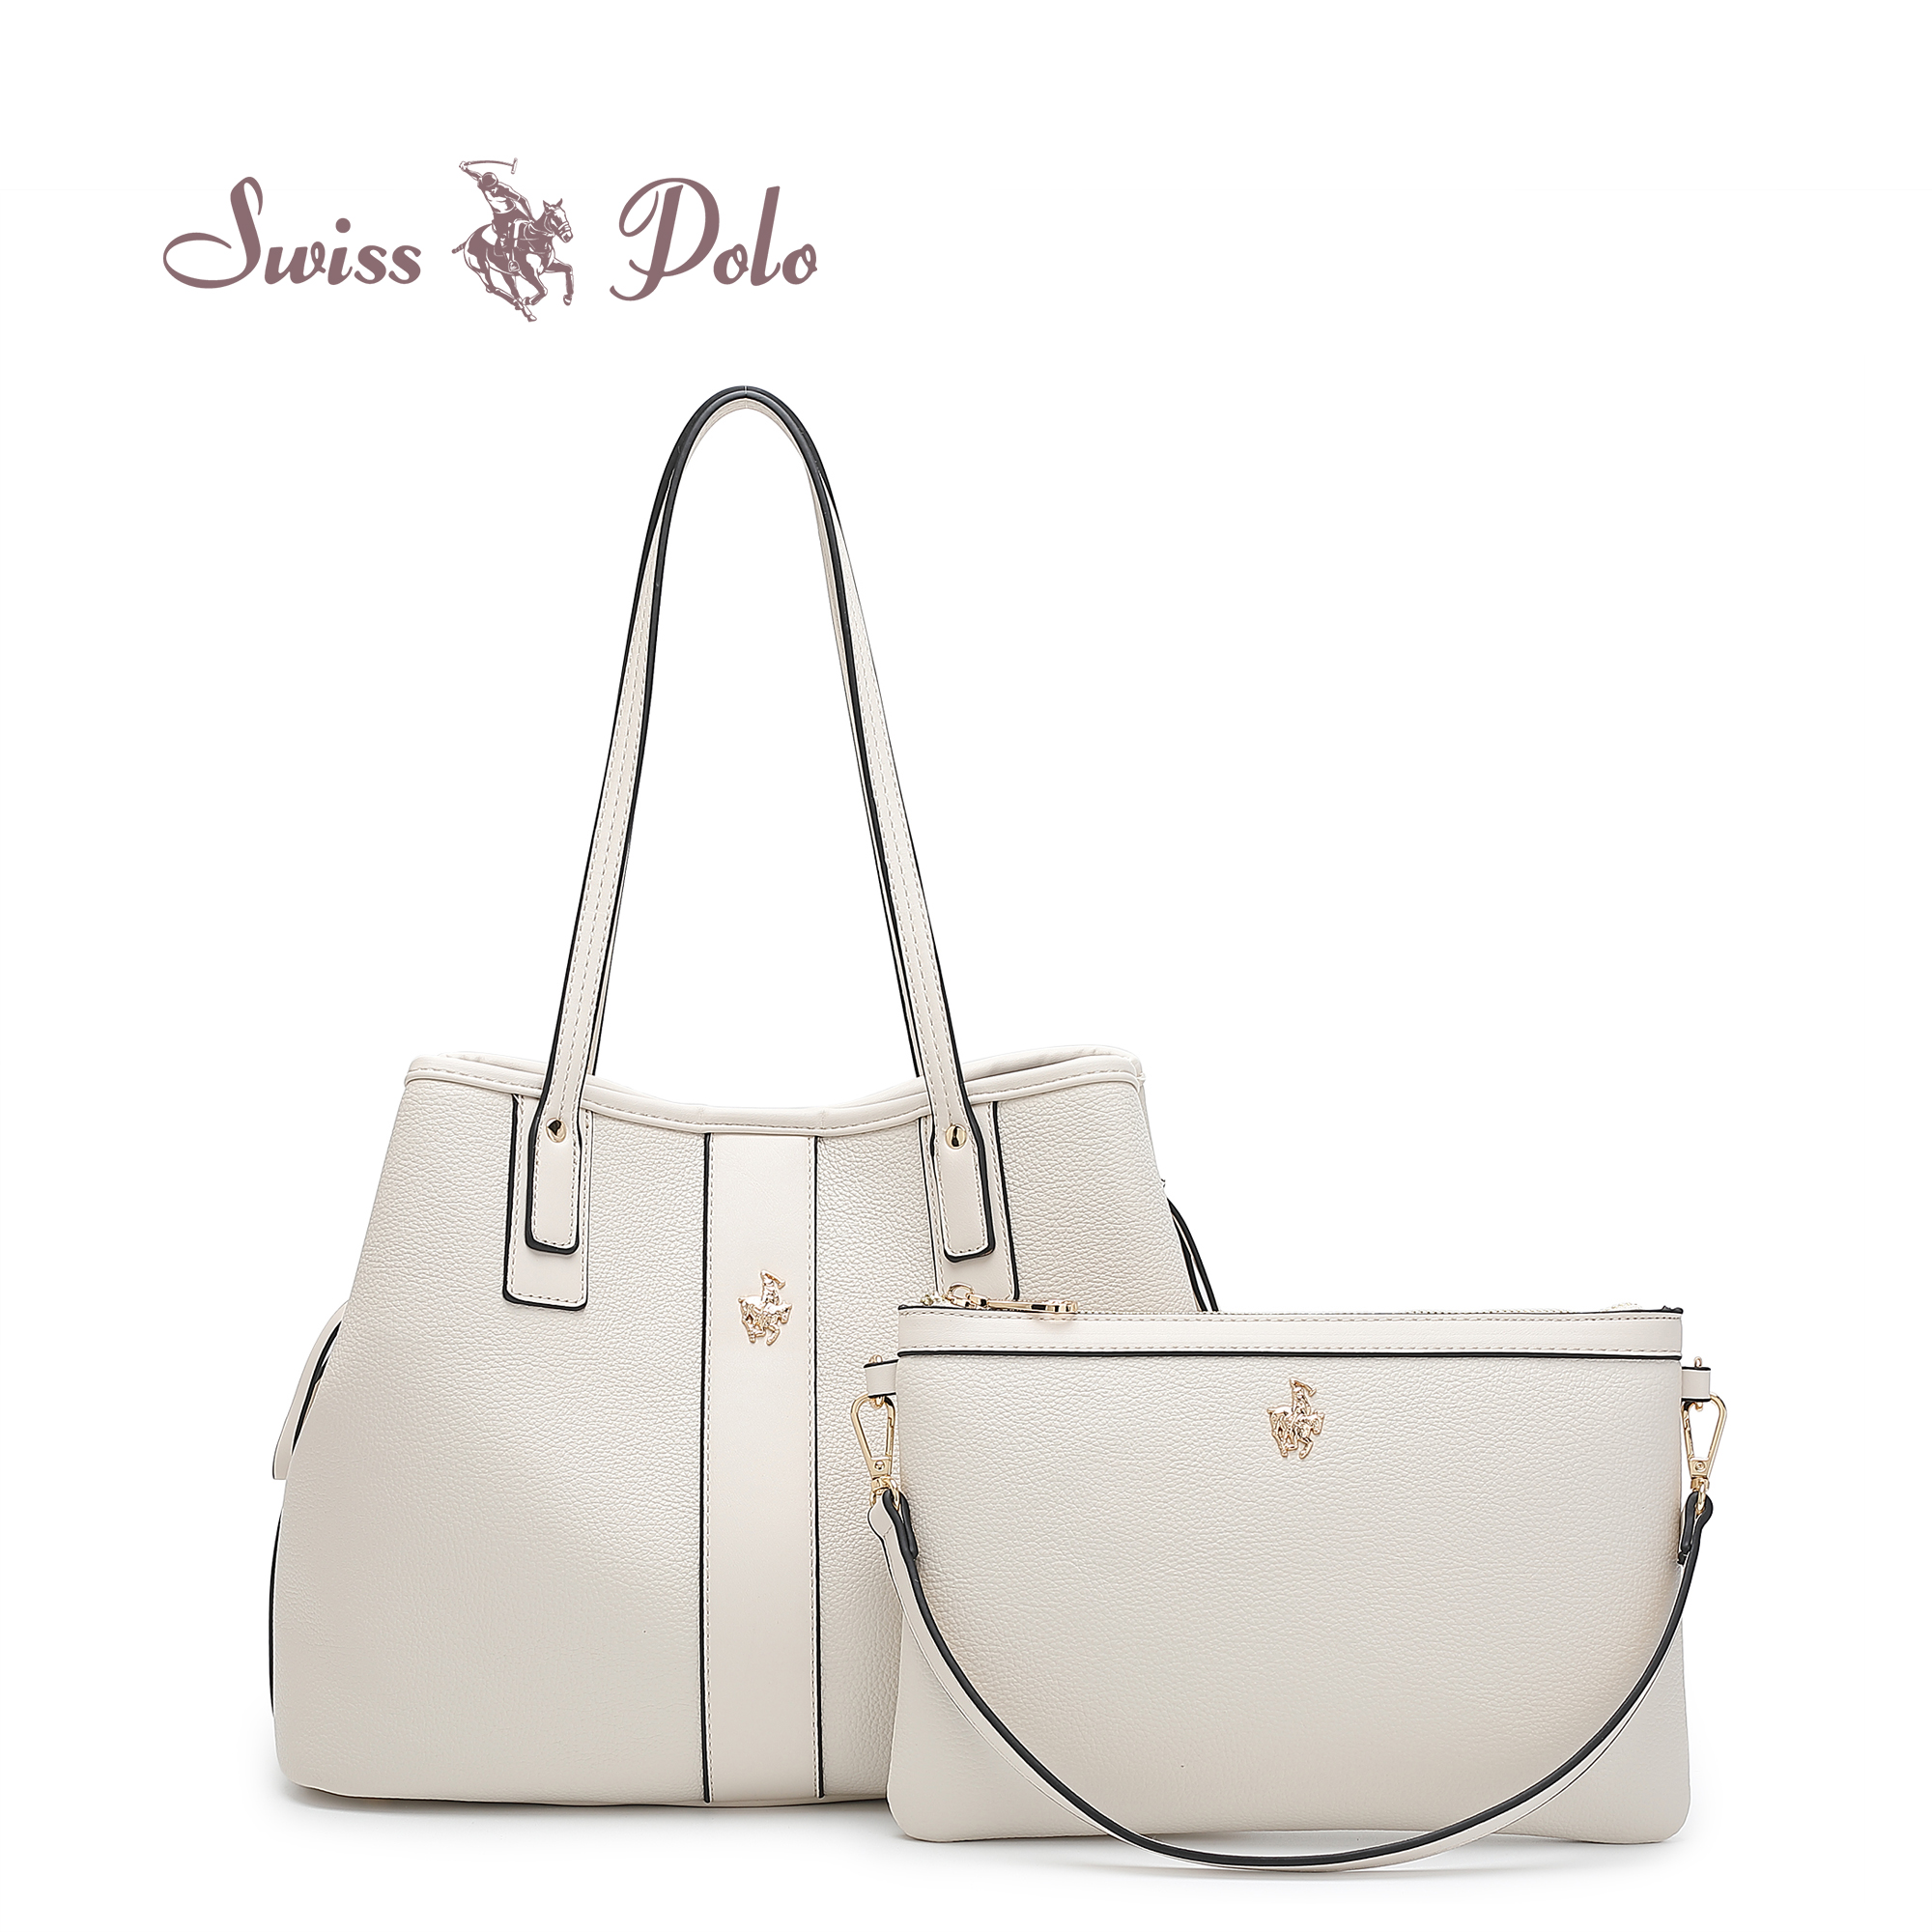 SWISS POLO 2 In 1 Ladies Top Handle Tote Bag With Pouch HFT 7686-5 WHITE